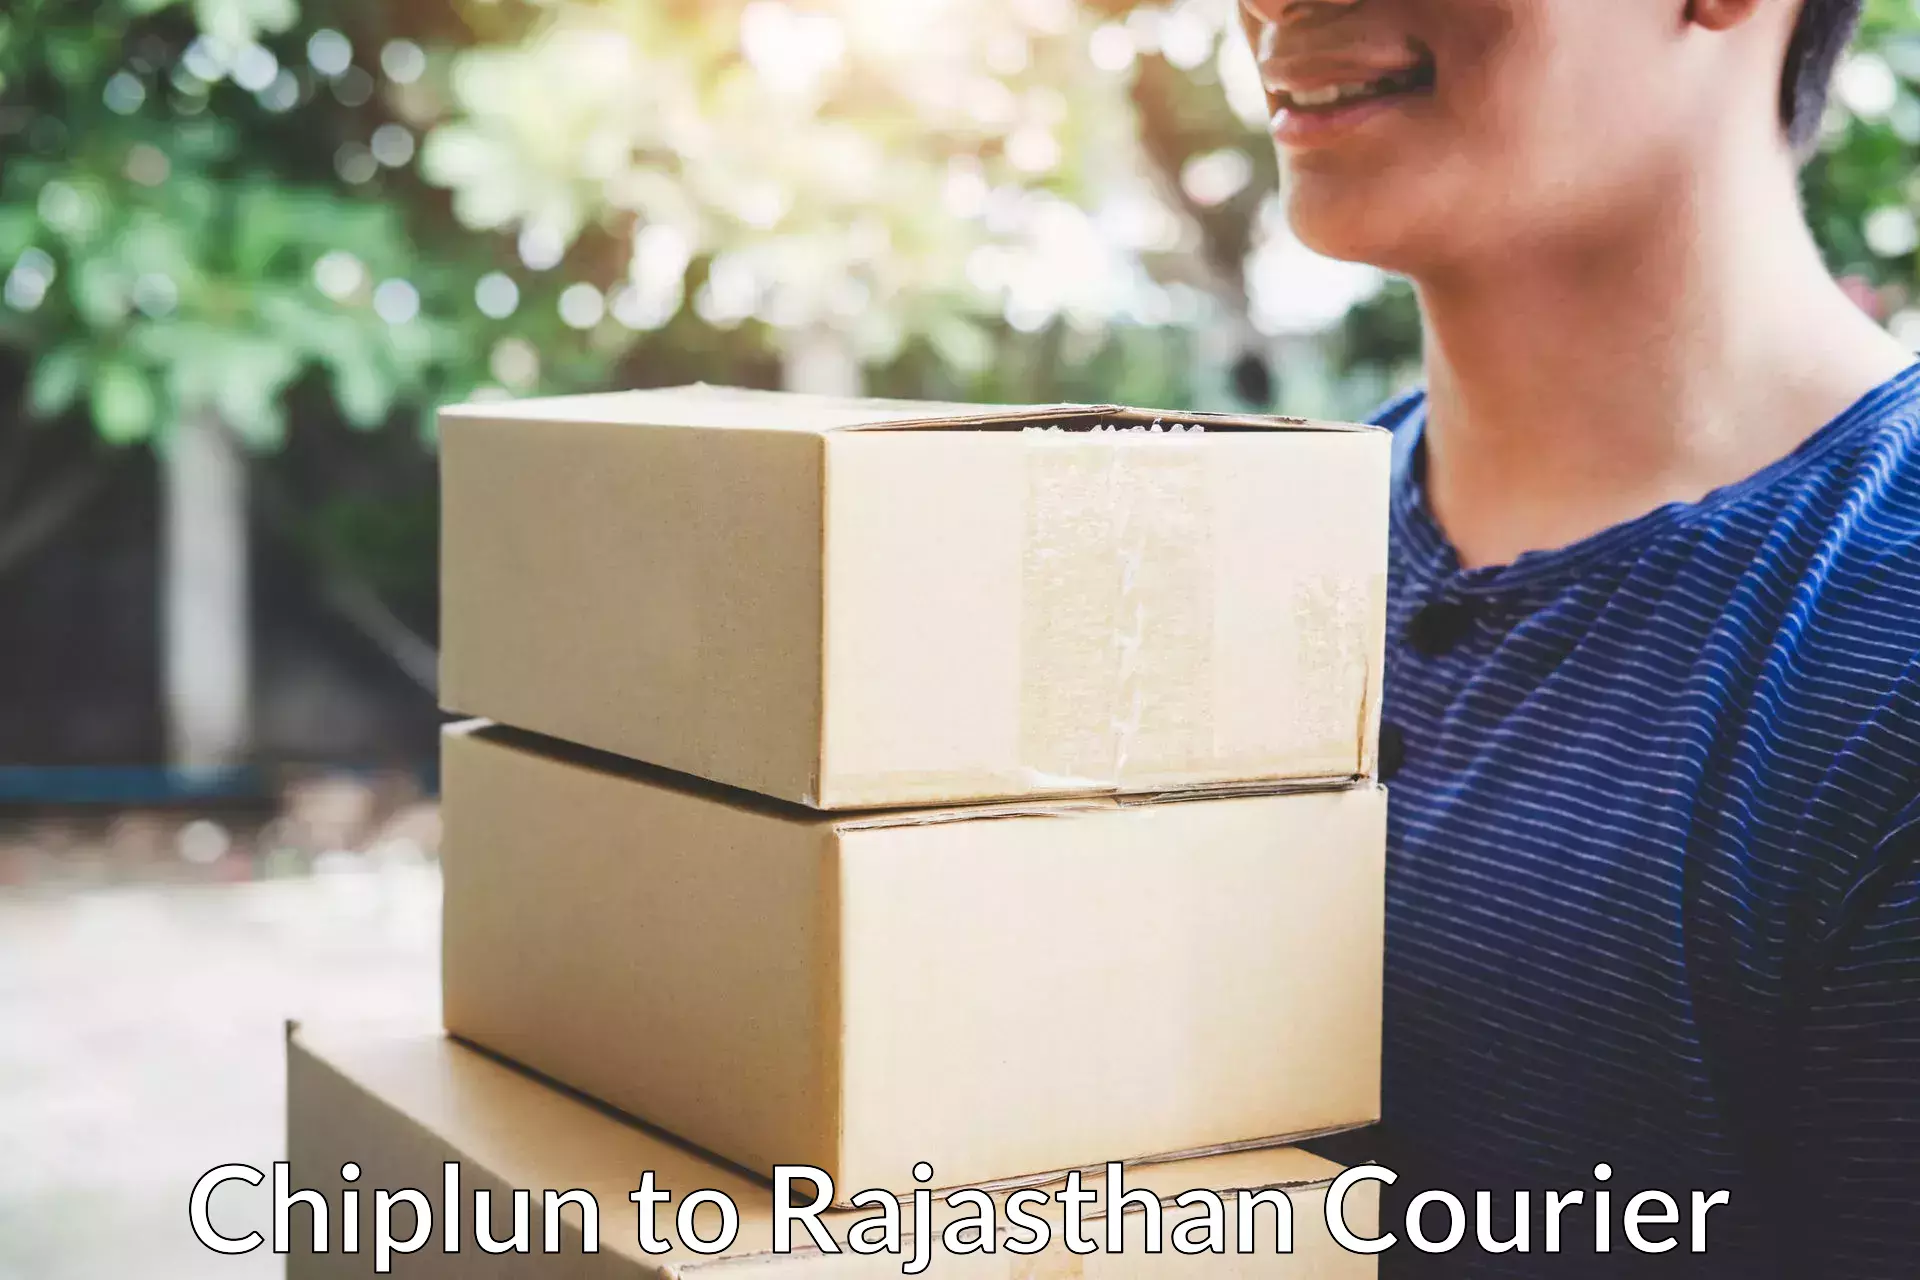 Furniture transport company Chiplun to Rajasthan